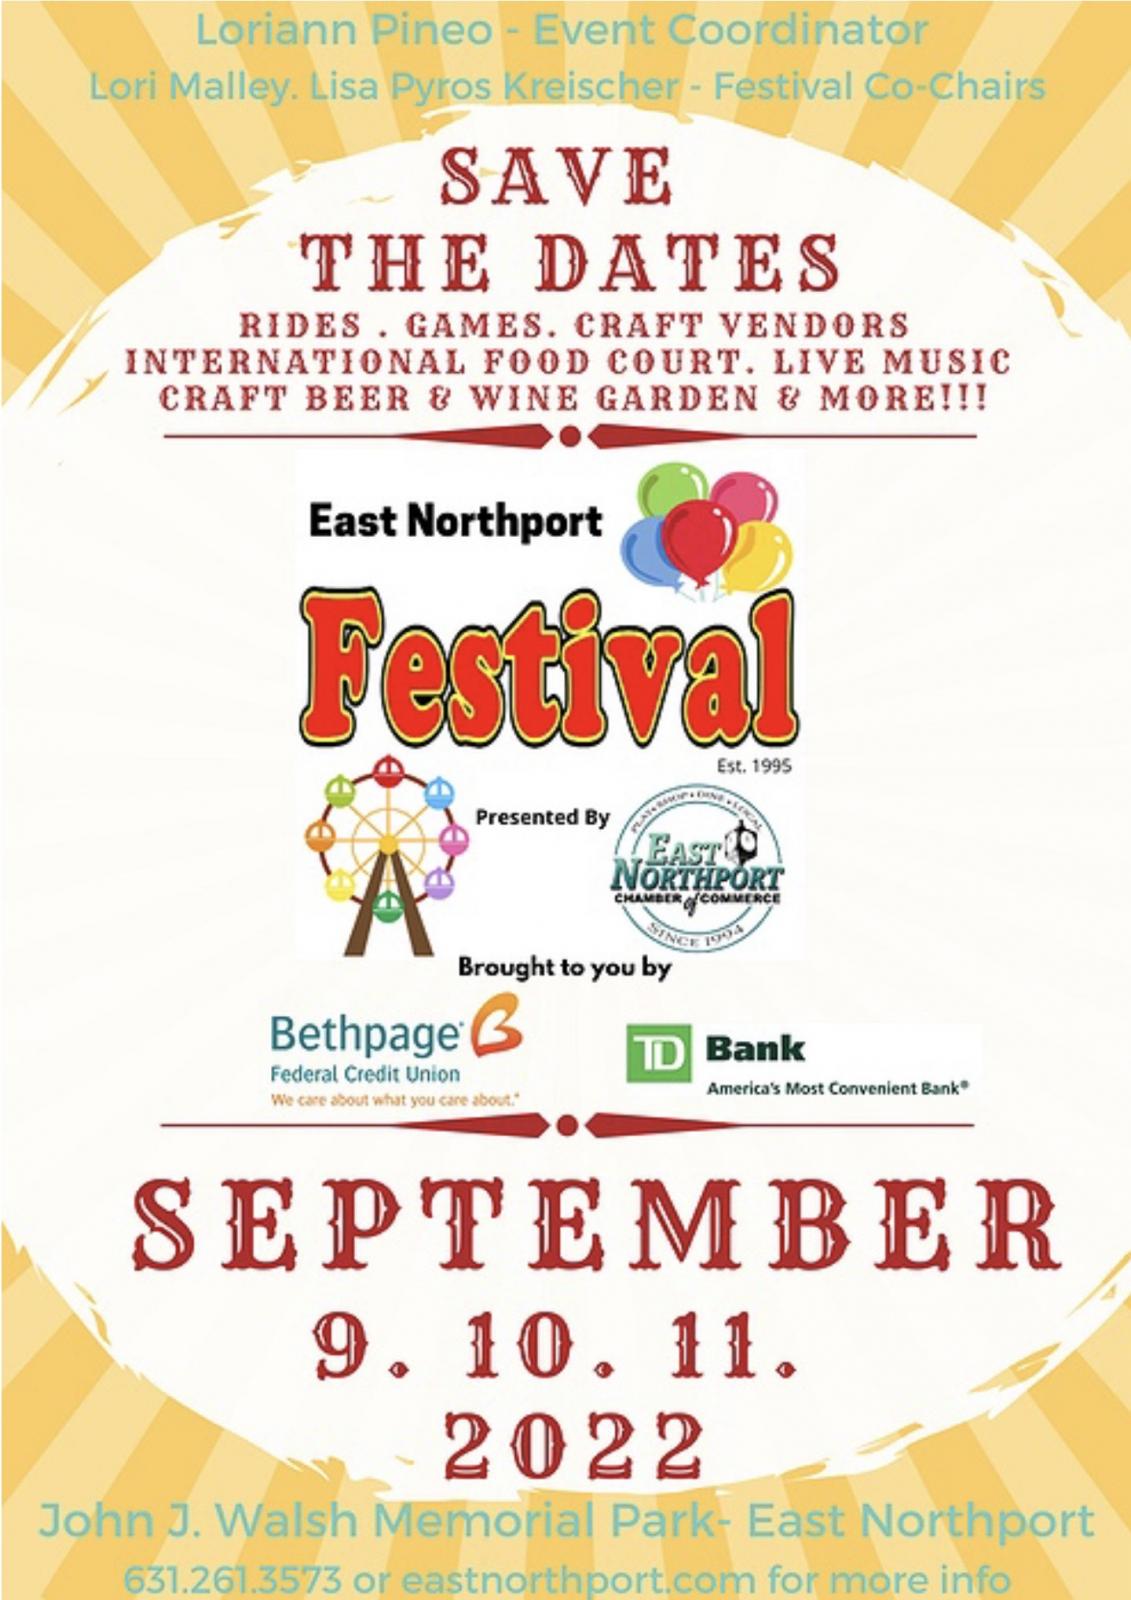 East Northport Festival Positive Community Connections